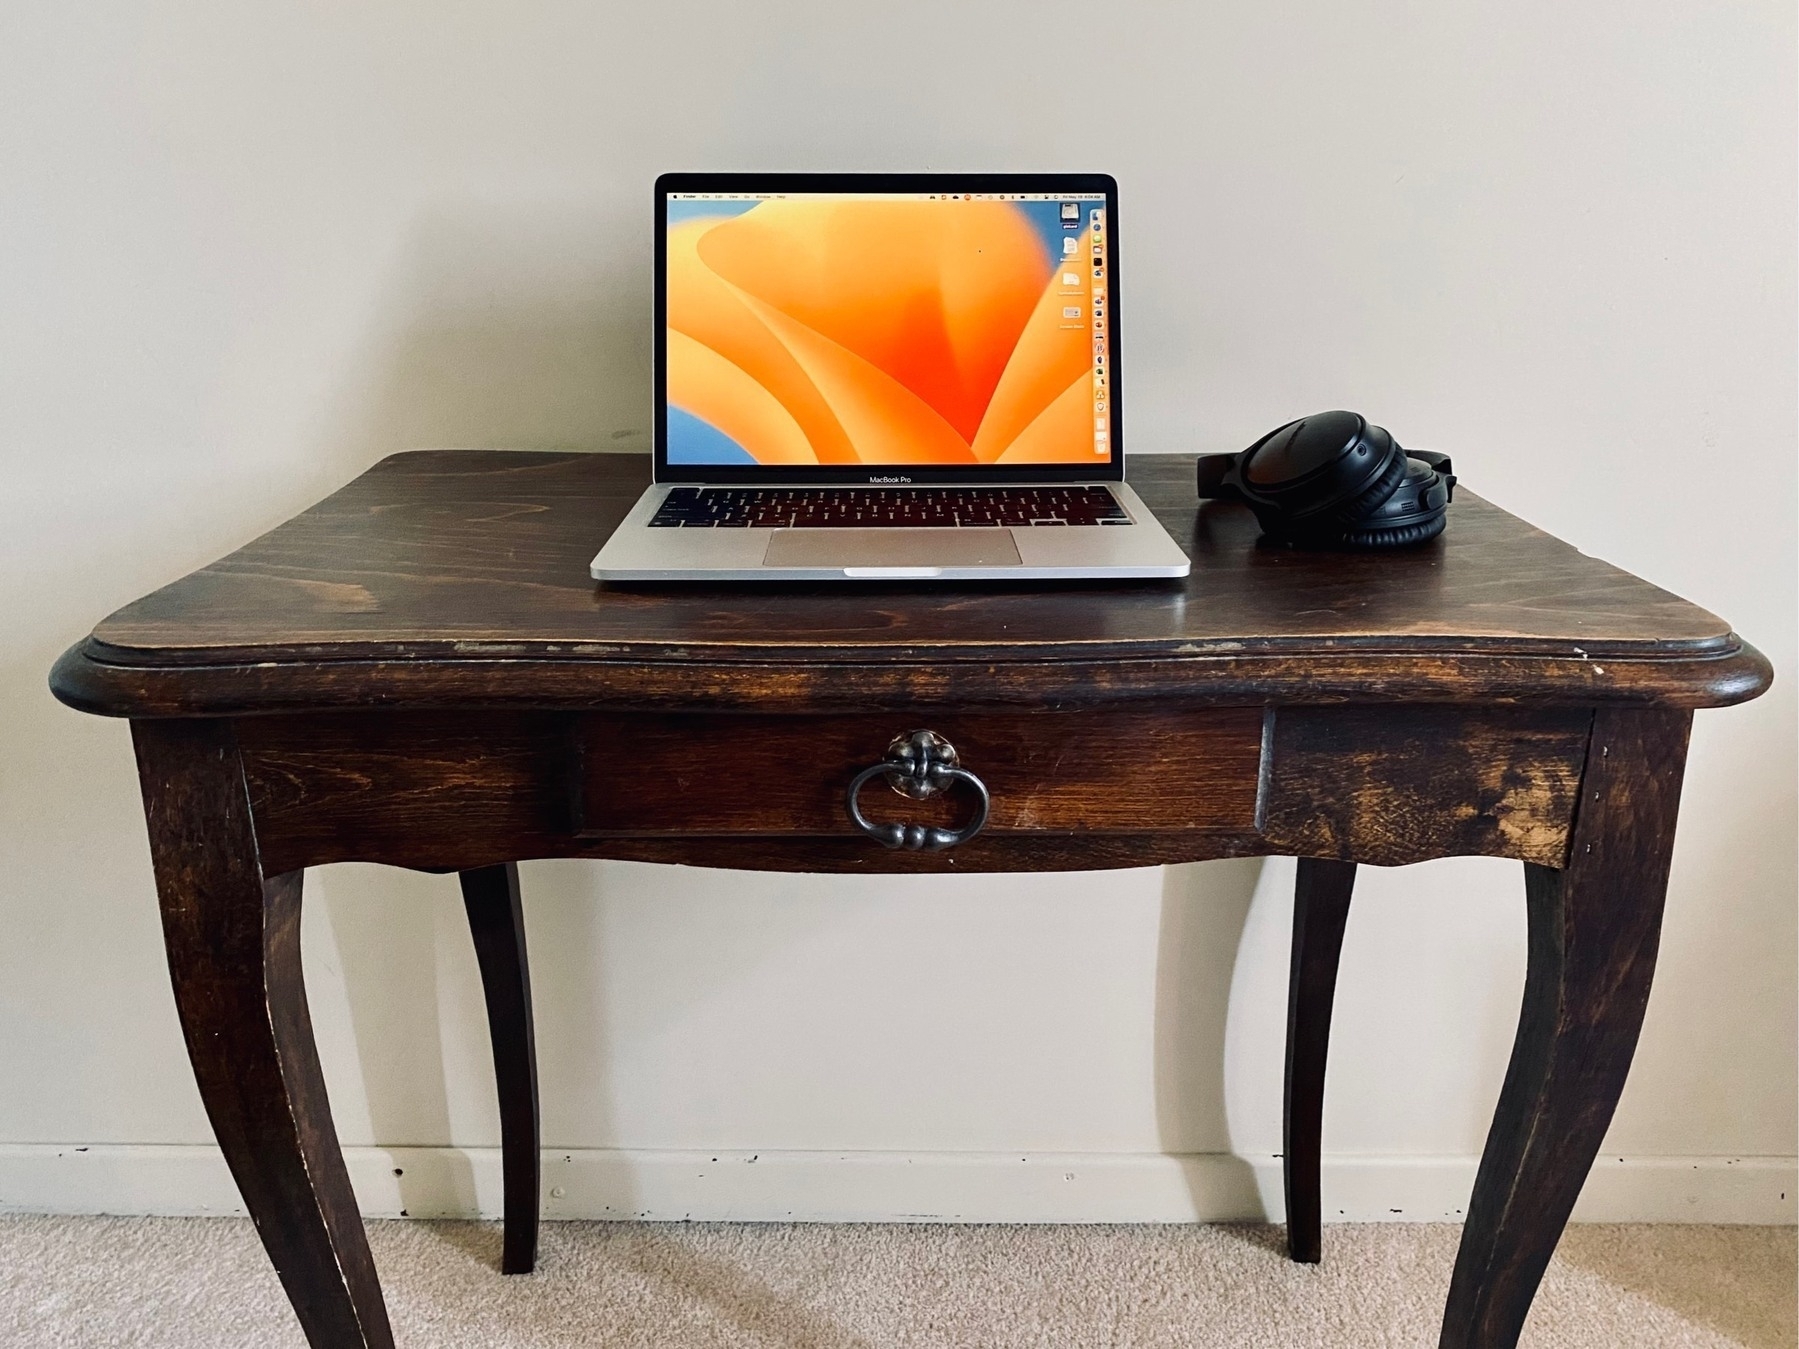 Photo of a small wooden writing desk dominated by a MacBook Pro and over-ear headphones.